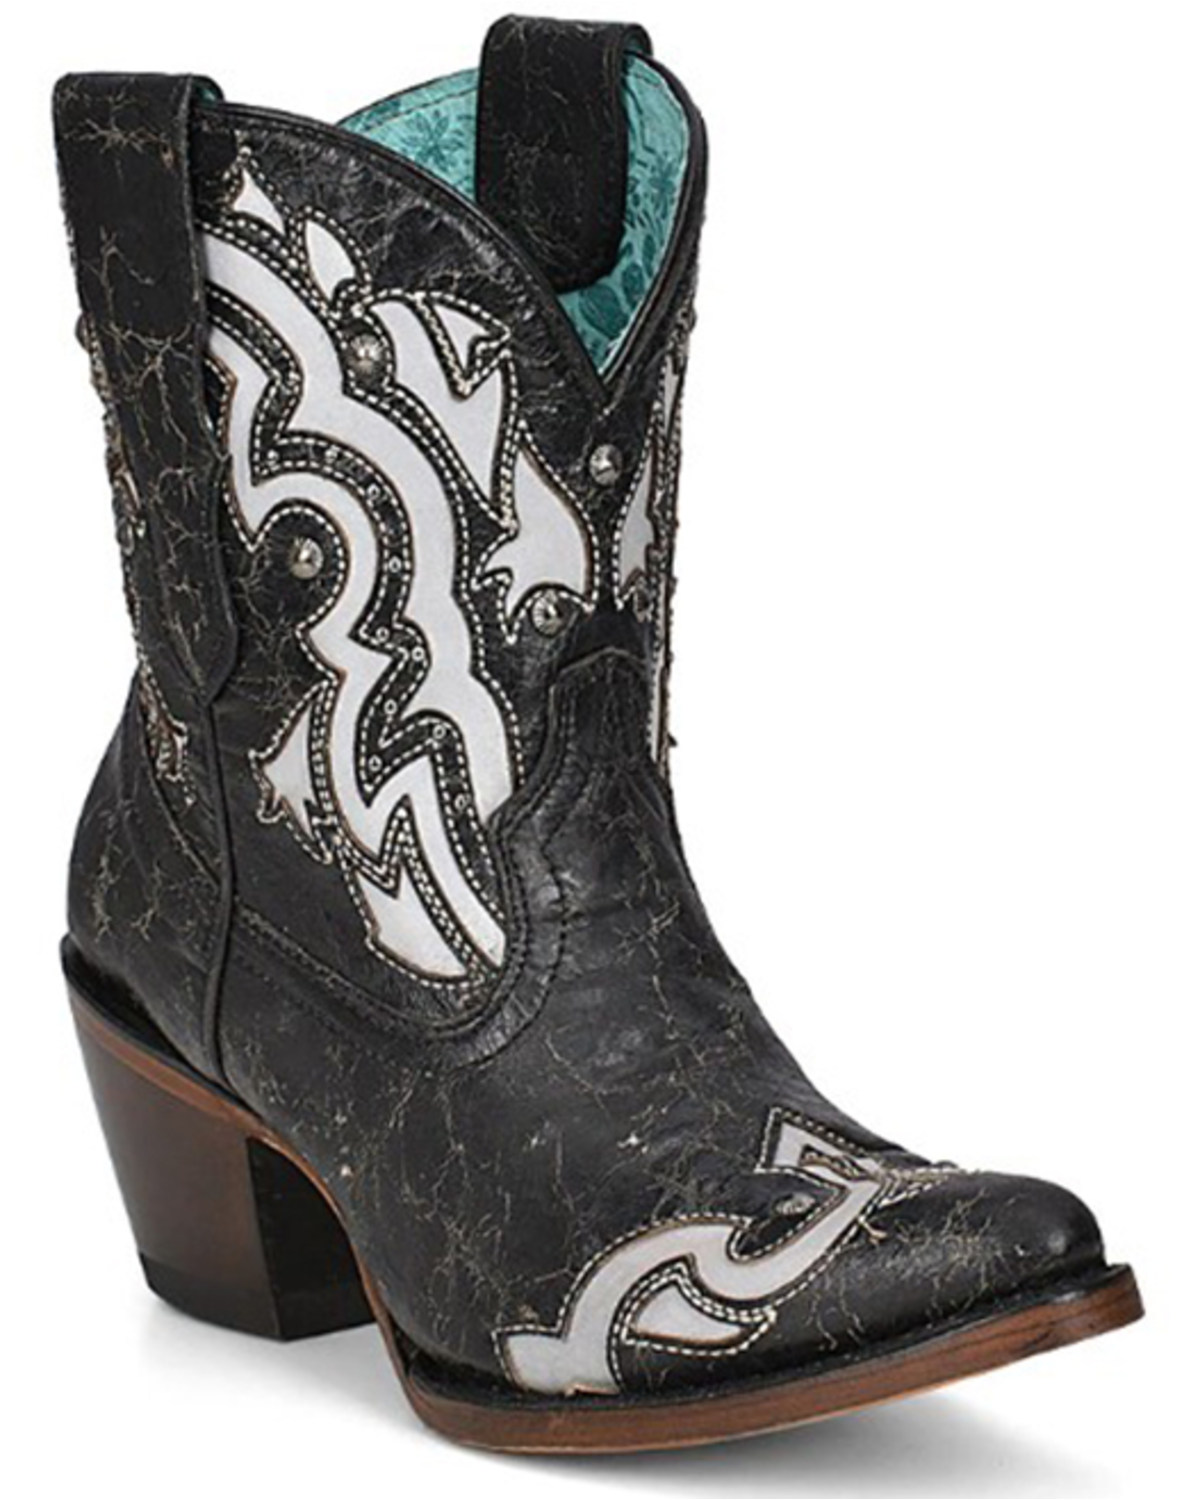 Corral Women's Inlay Studded Western Fashion Booties - Pointed Toe